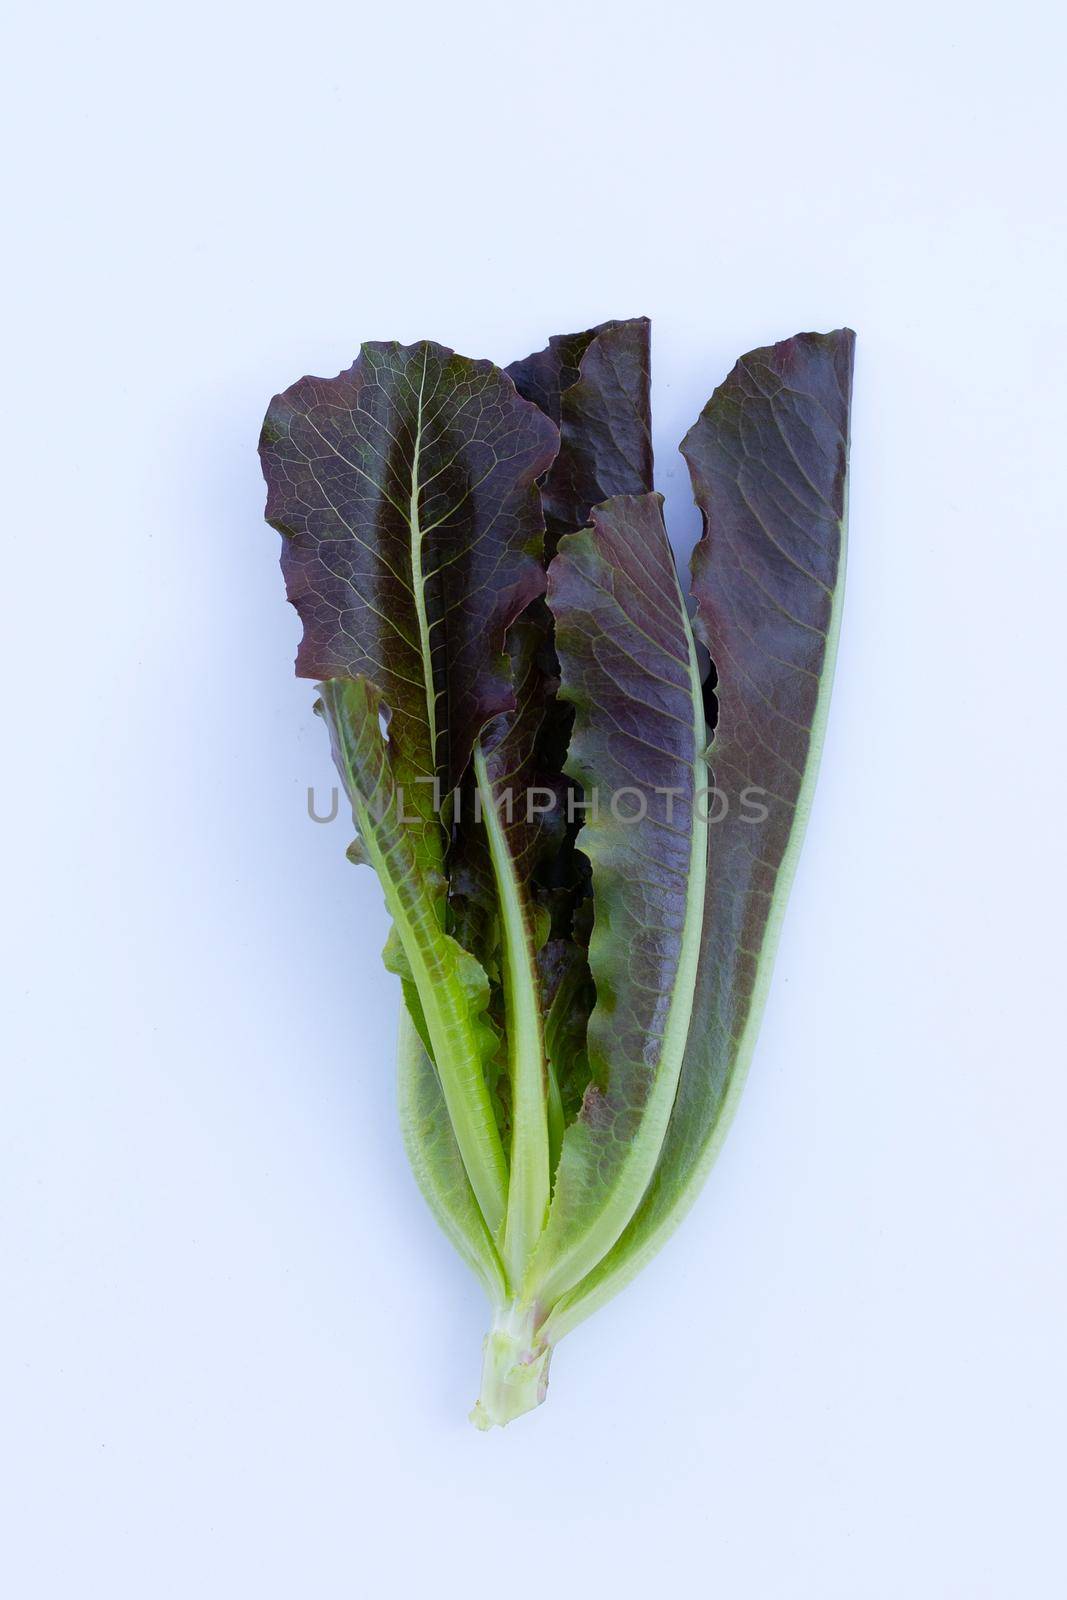 Red Cos Lettuce leaves on white background.